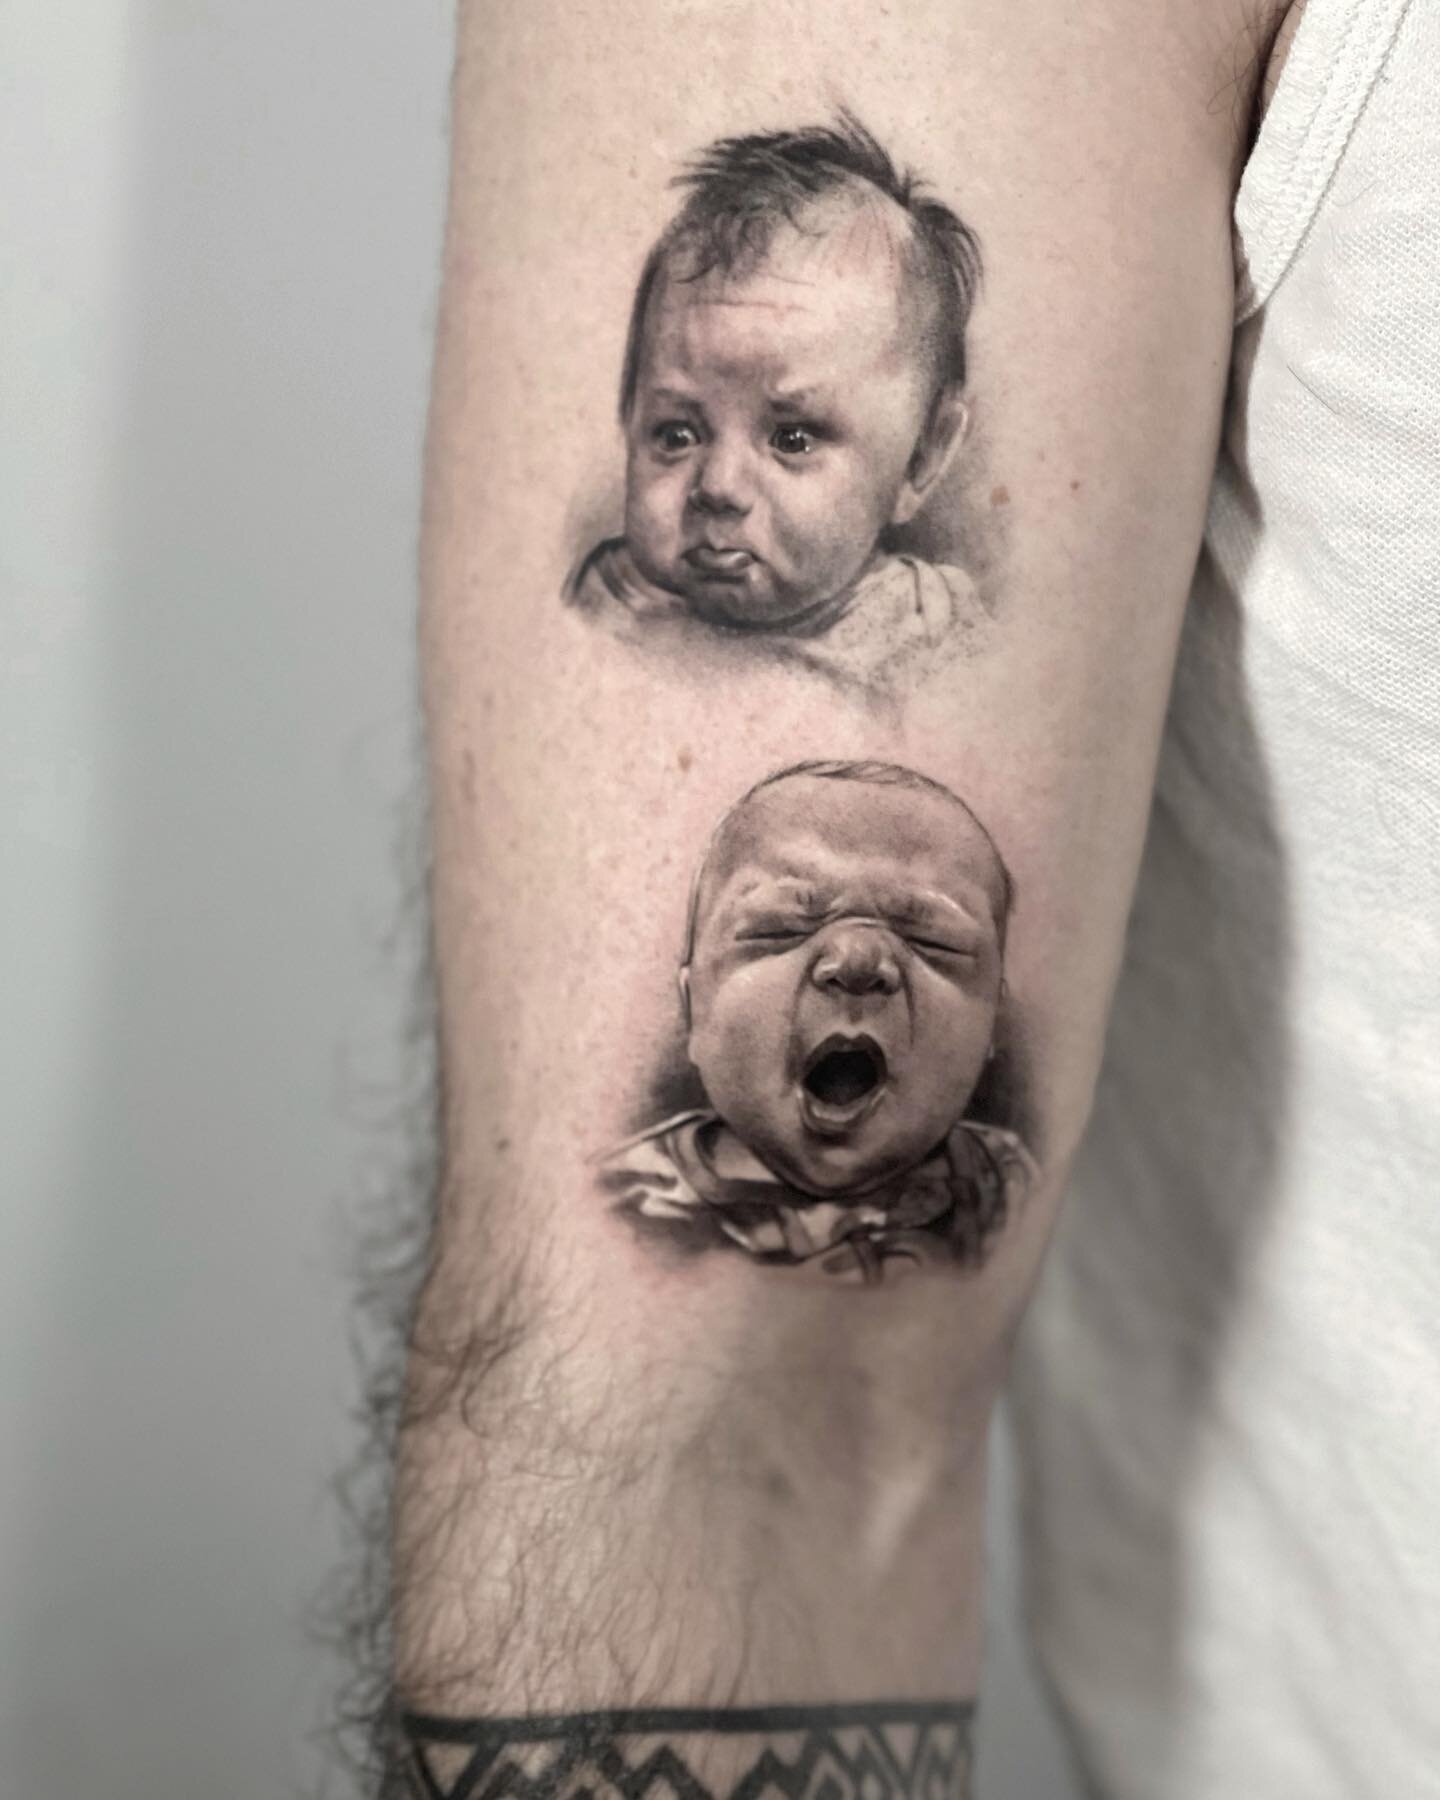 This one just cracks me up 😂
His two boys are very cute and very dramatic! 😆 
the top tattoo is two years healed and touched up , the lower one took me 2 hours 

#tattoo #kidstattoo #portraittattoo #familytattoo #funnytattoo #cutetattoo #microreali